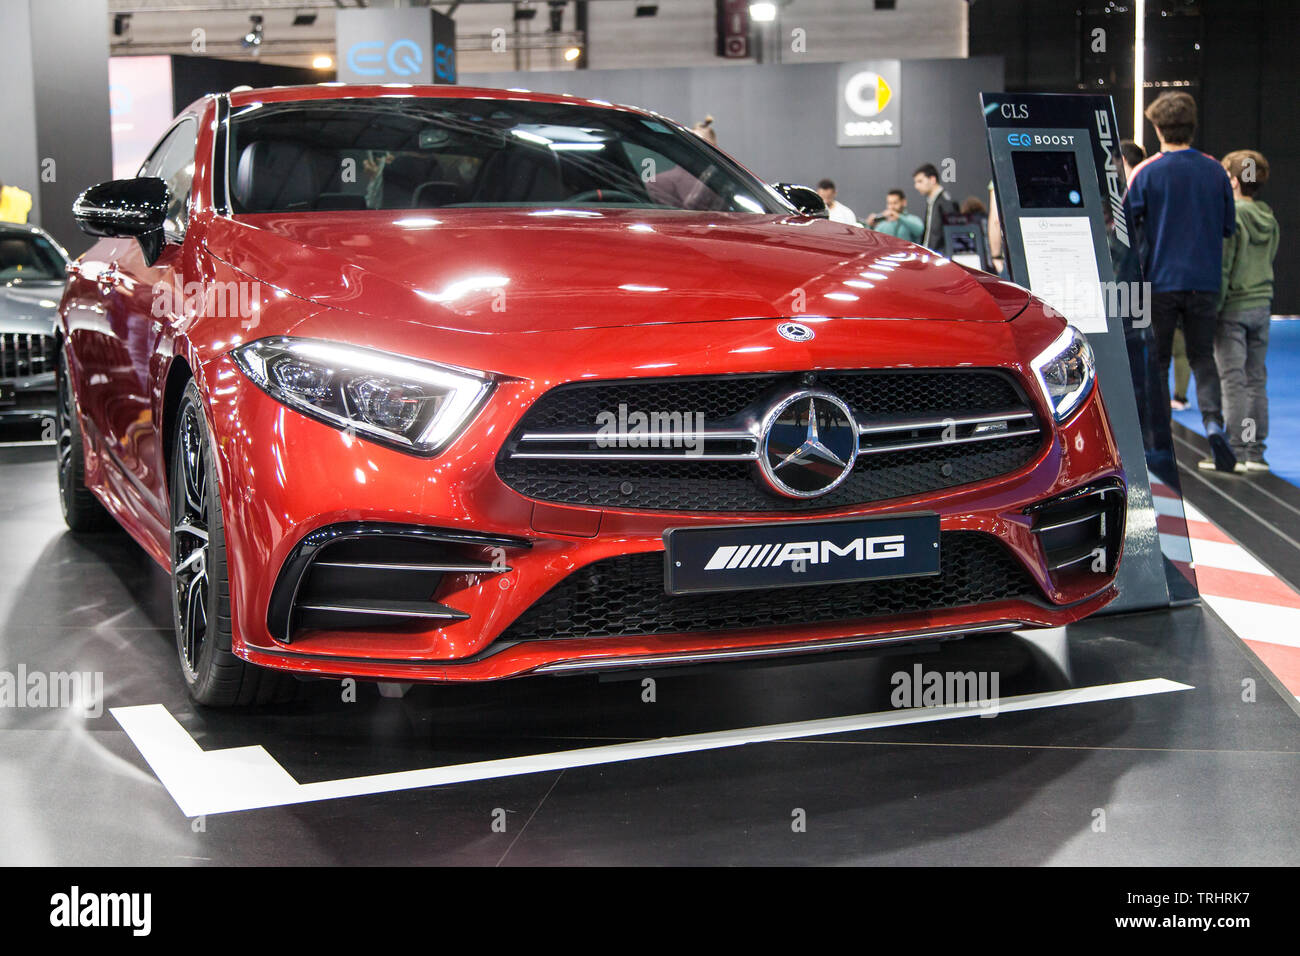 Barcelona, Spain - May 19, 2019: Mercedes-AMG CLS 53 4MATIC+ showcased at Automobile Barcelona 2019 in Barcelona, Spain. Stock Photo